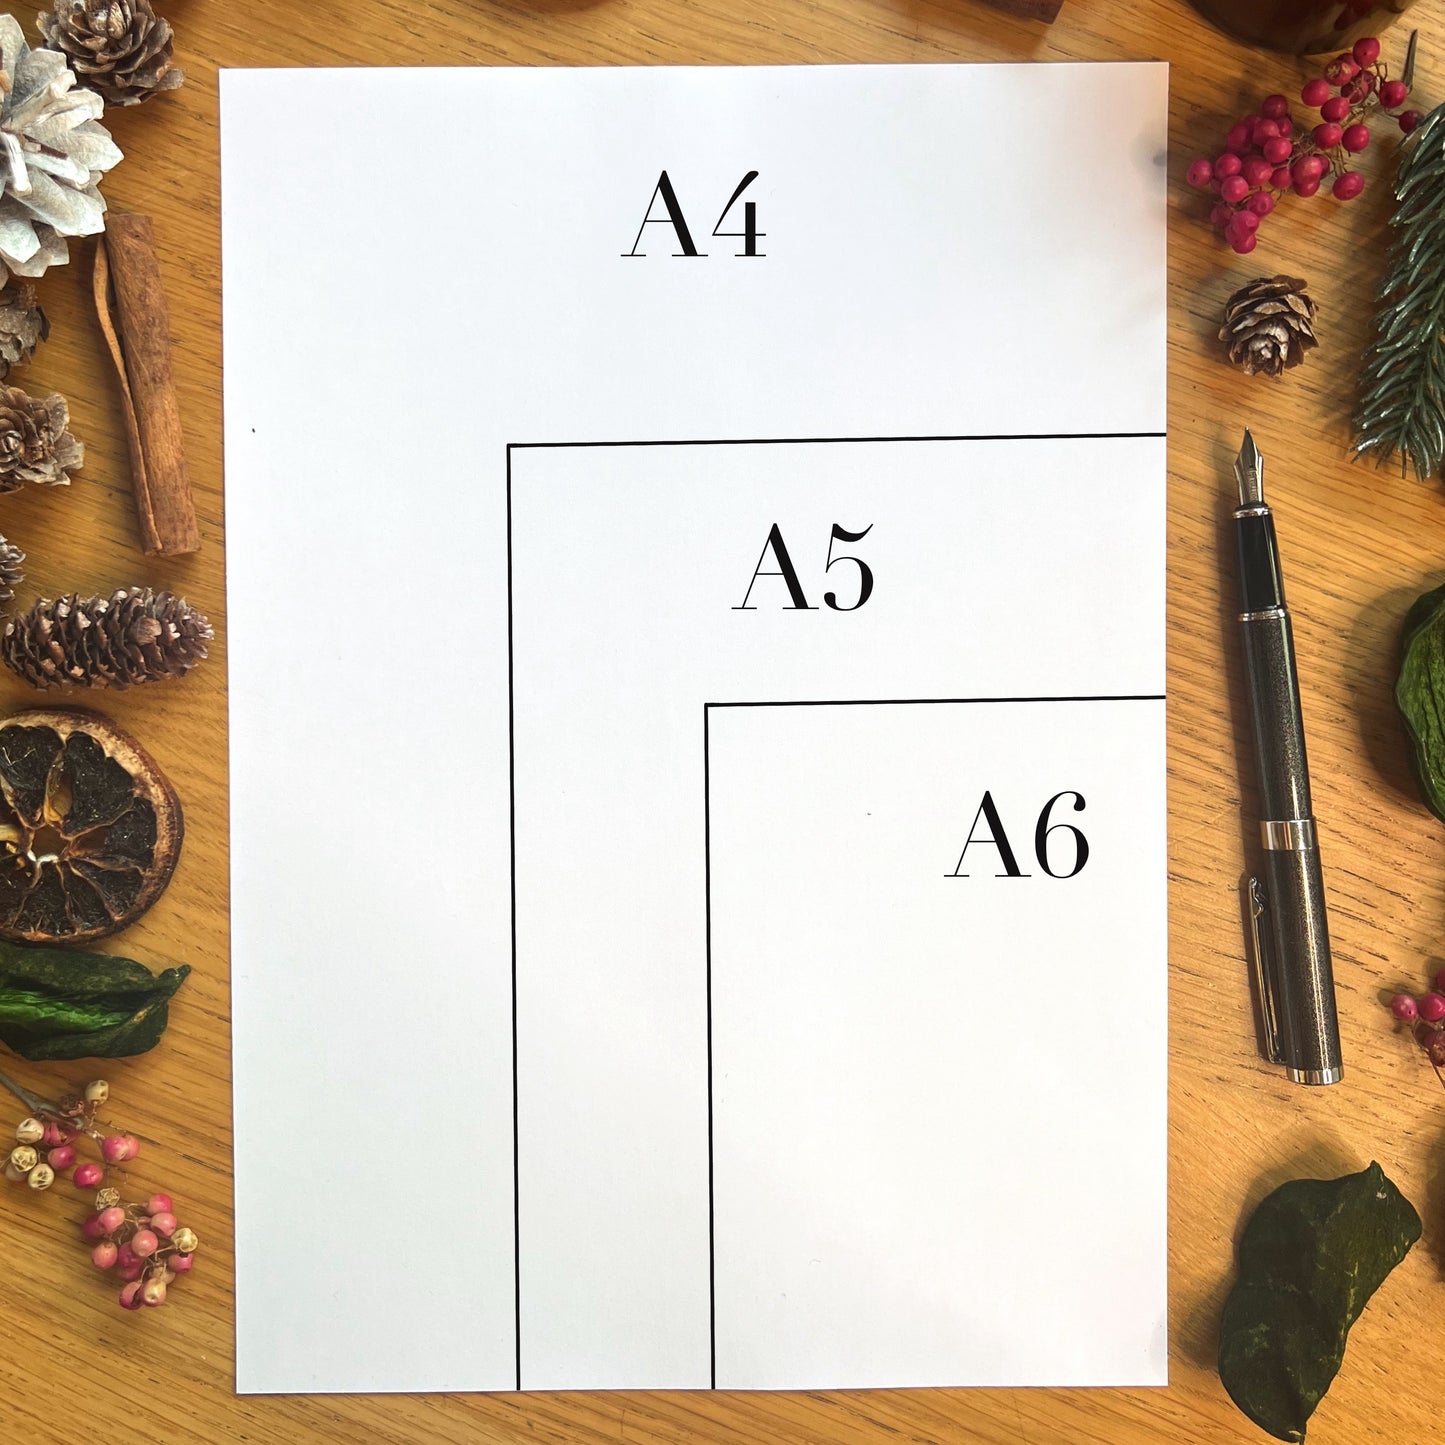 Paper size sample shows an A4 sheet of paper on a table with winter decor and a fountain pen lying next to it.  The A4 has an A5 indicated as half the size of A4 and then an A6 indicated as half the size of A5